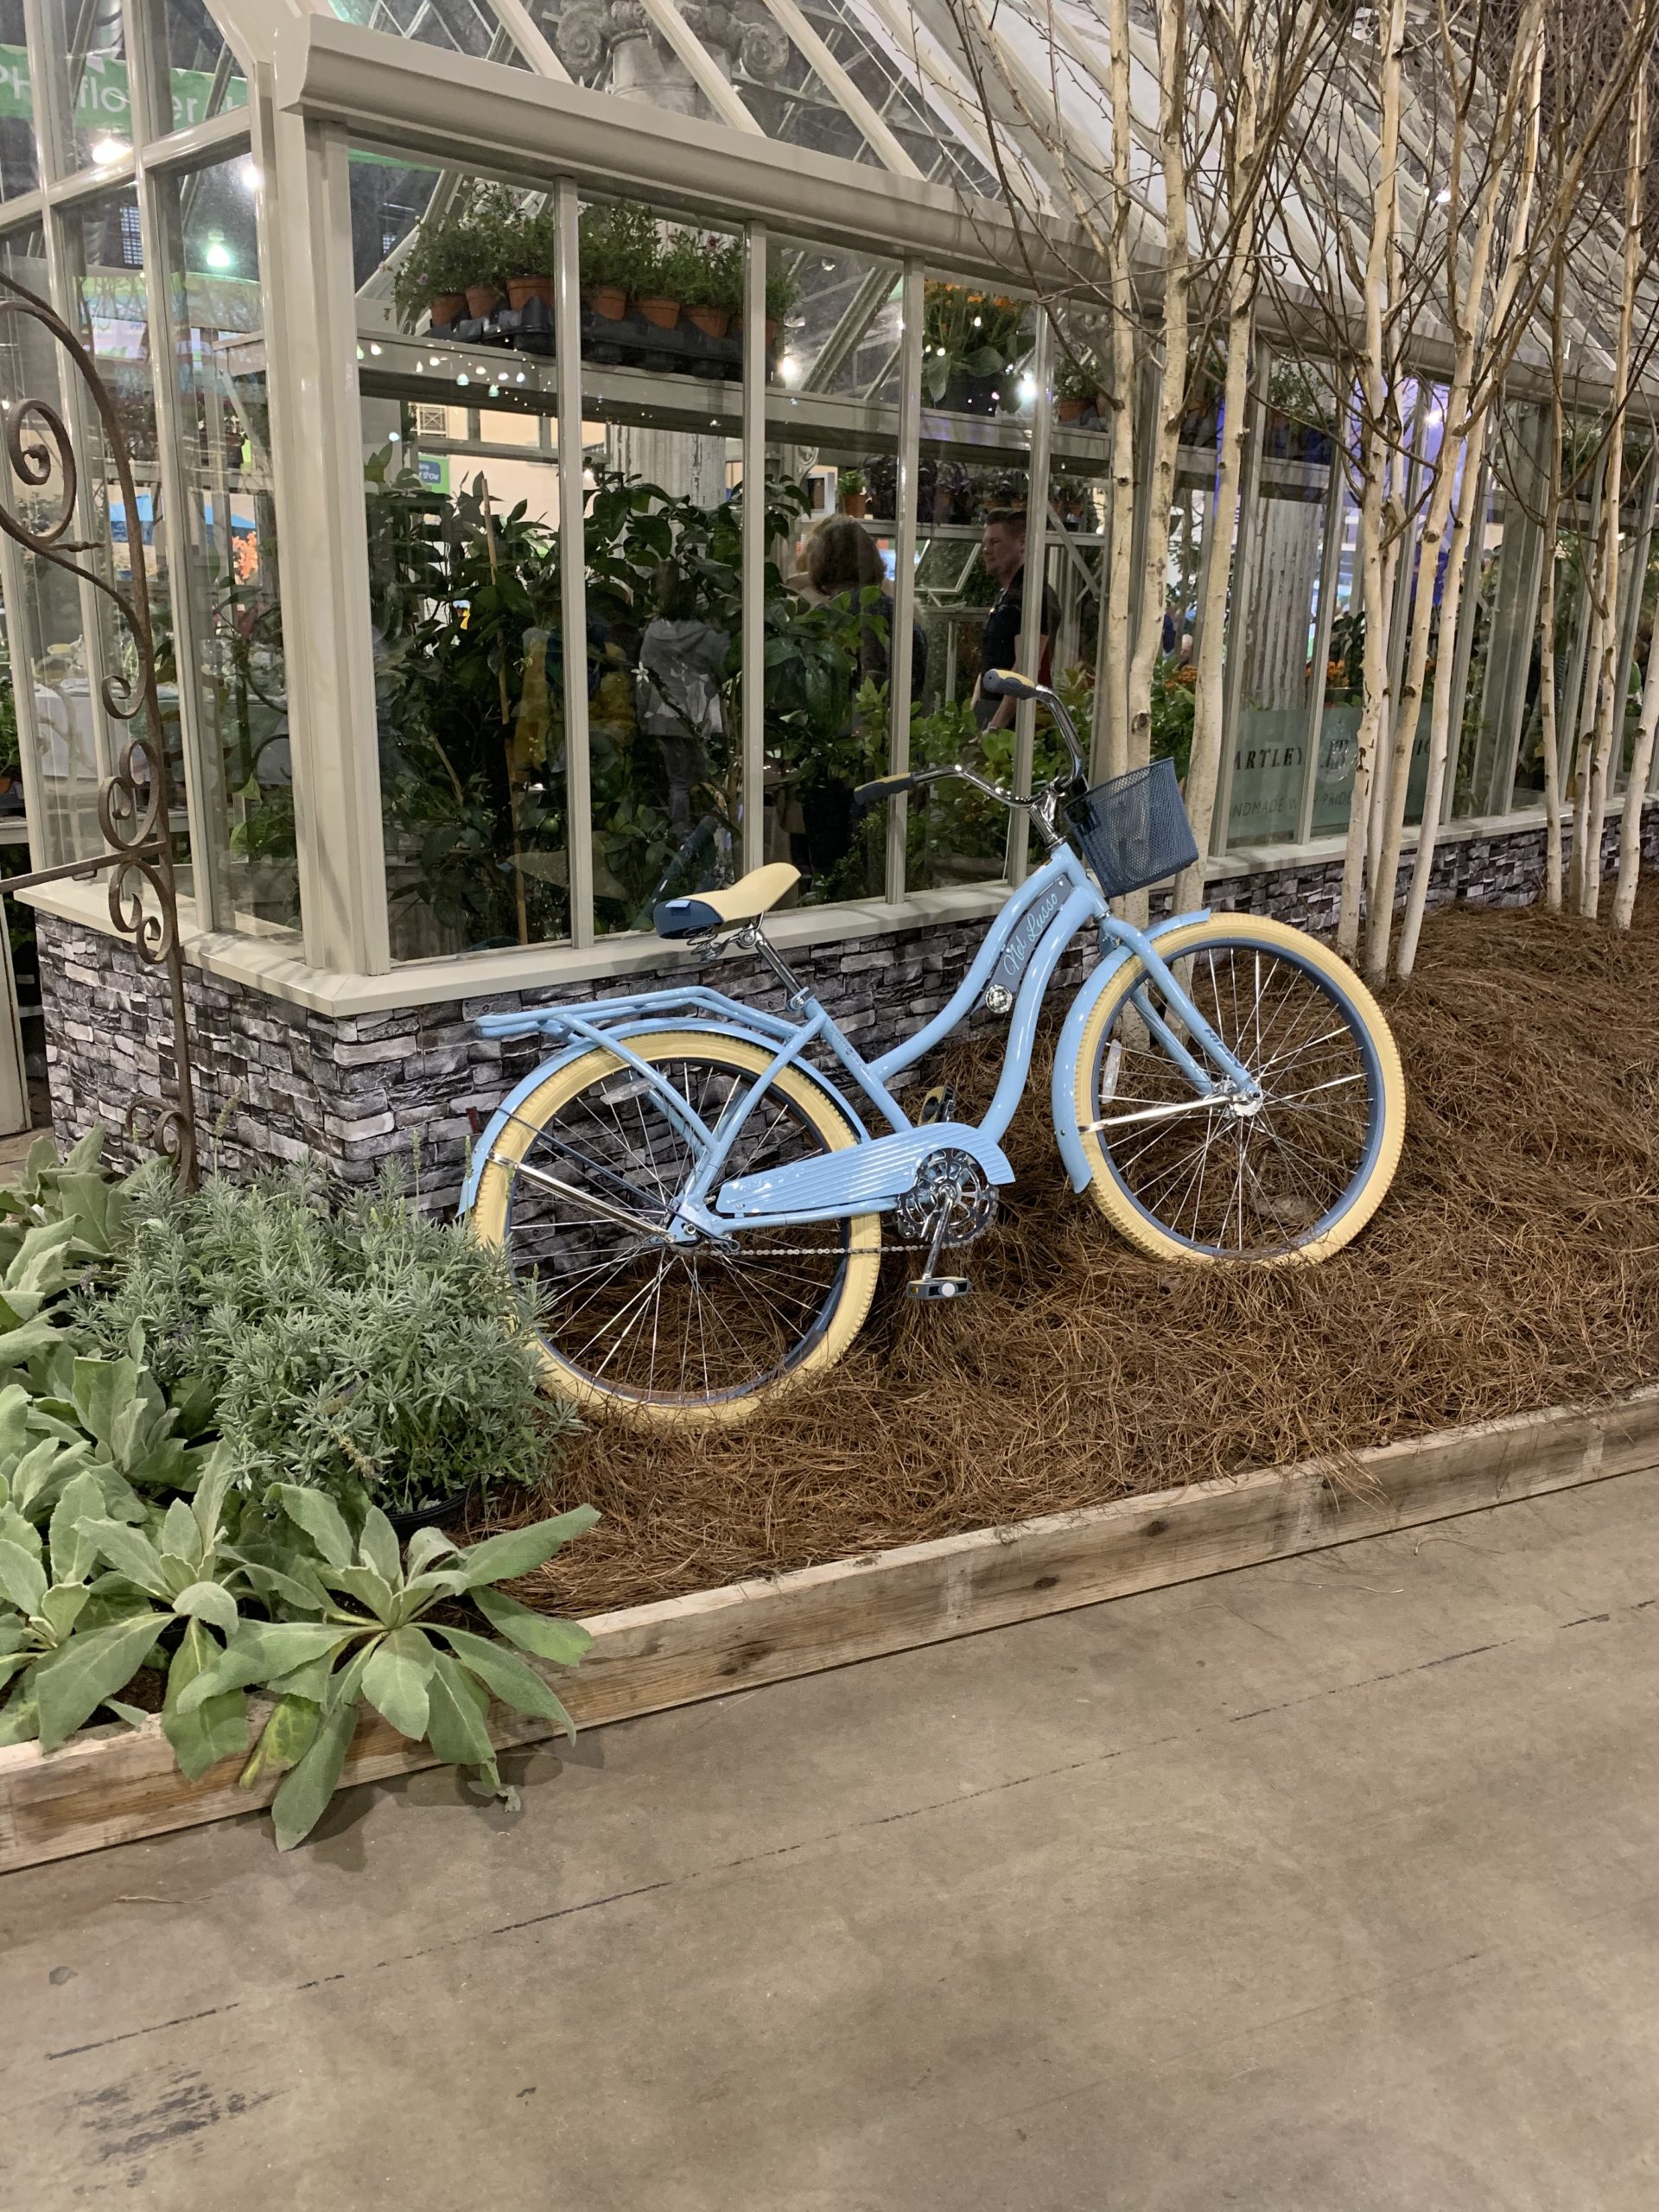 She Shed at the 2020 Philly Flower Show